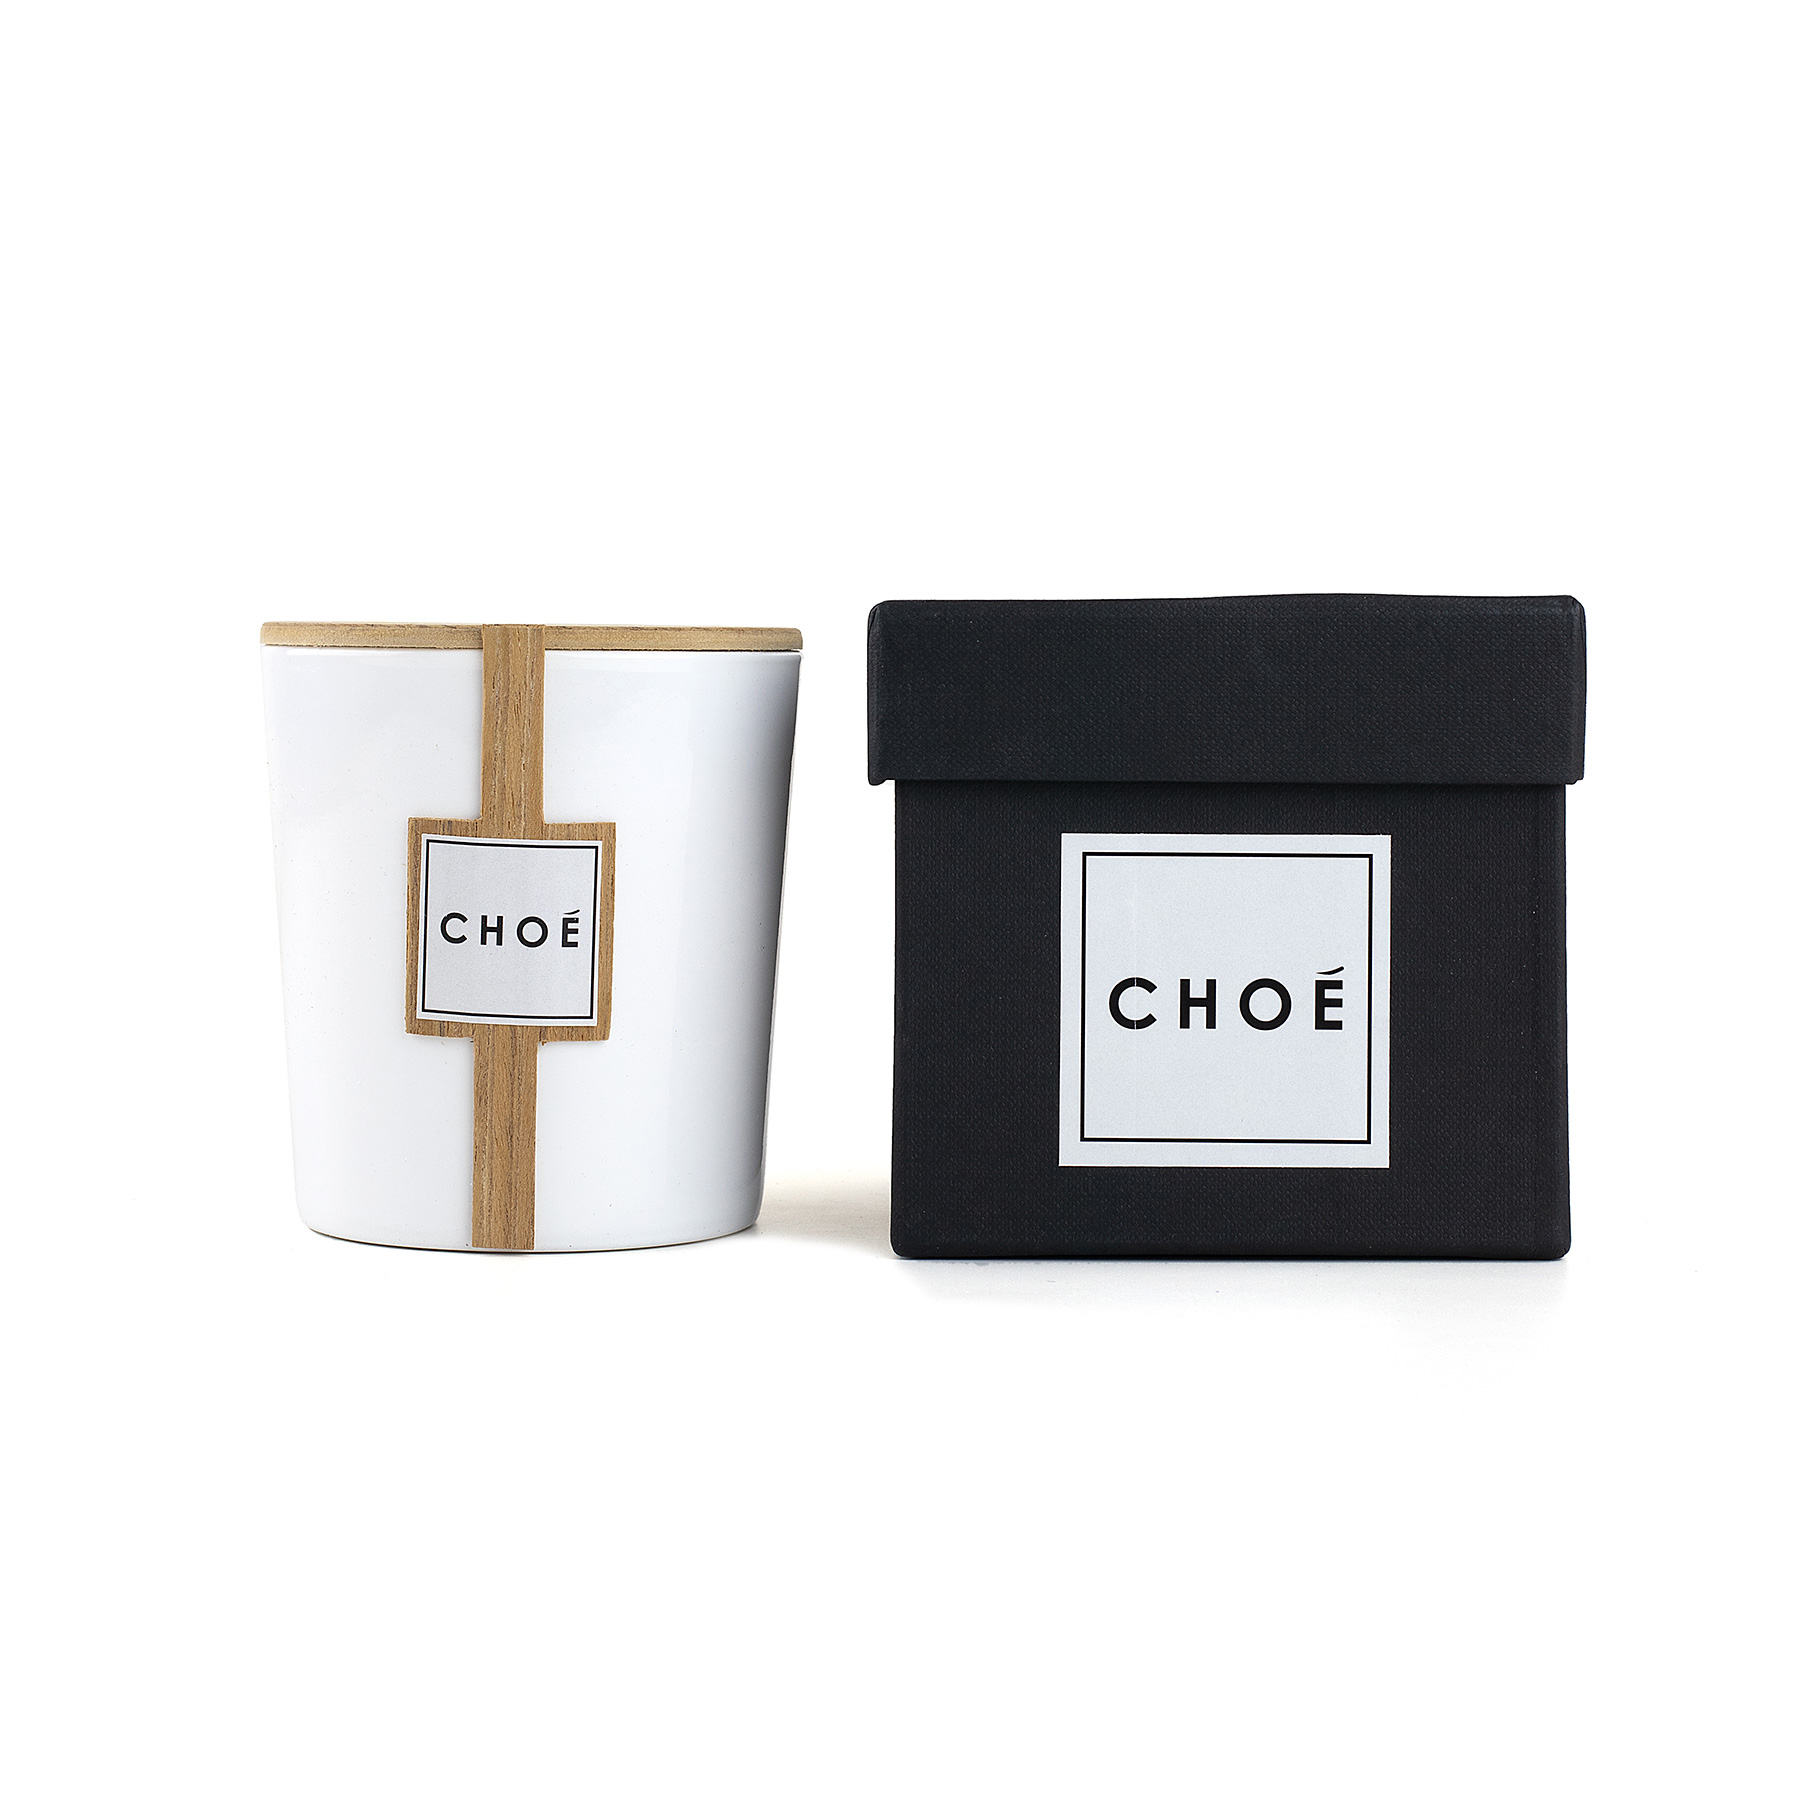 Choé Candles Soy Beeswax Amber Scented Candle